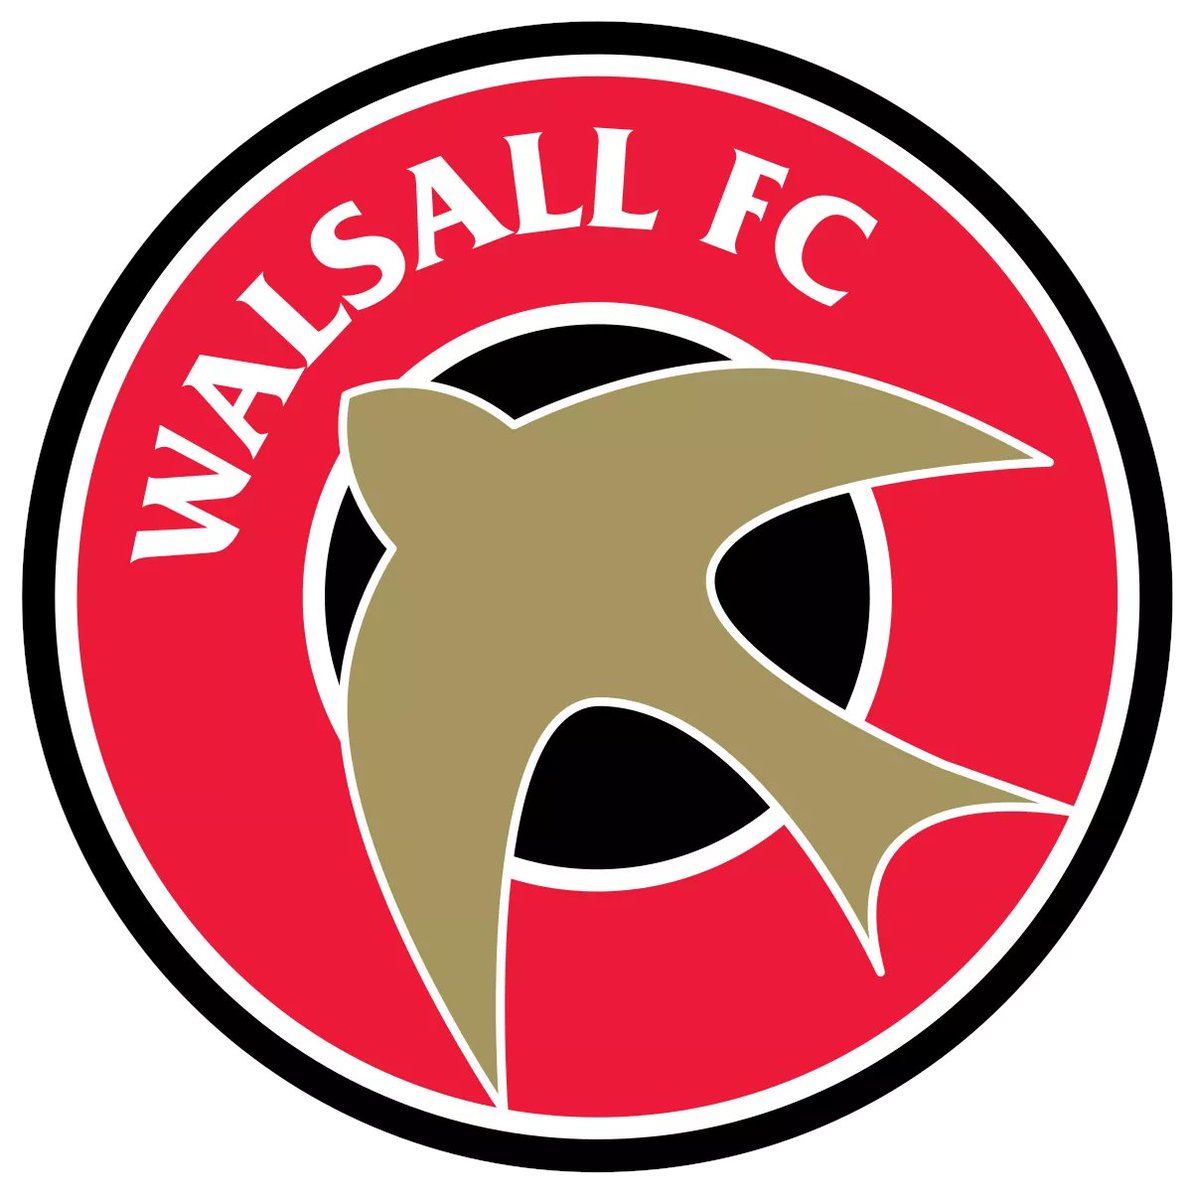 40) Walsall Points: 139 Manager: Gary Rowett Walsall were predicted to finish 63rd and finished 40th. Another Rowett masterclass with no budget.